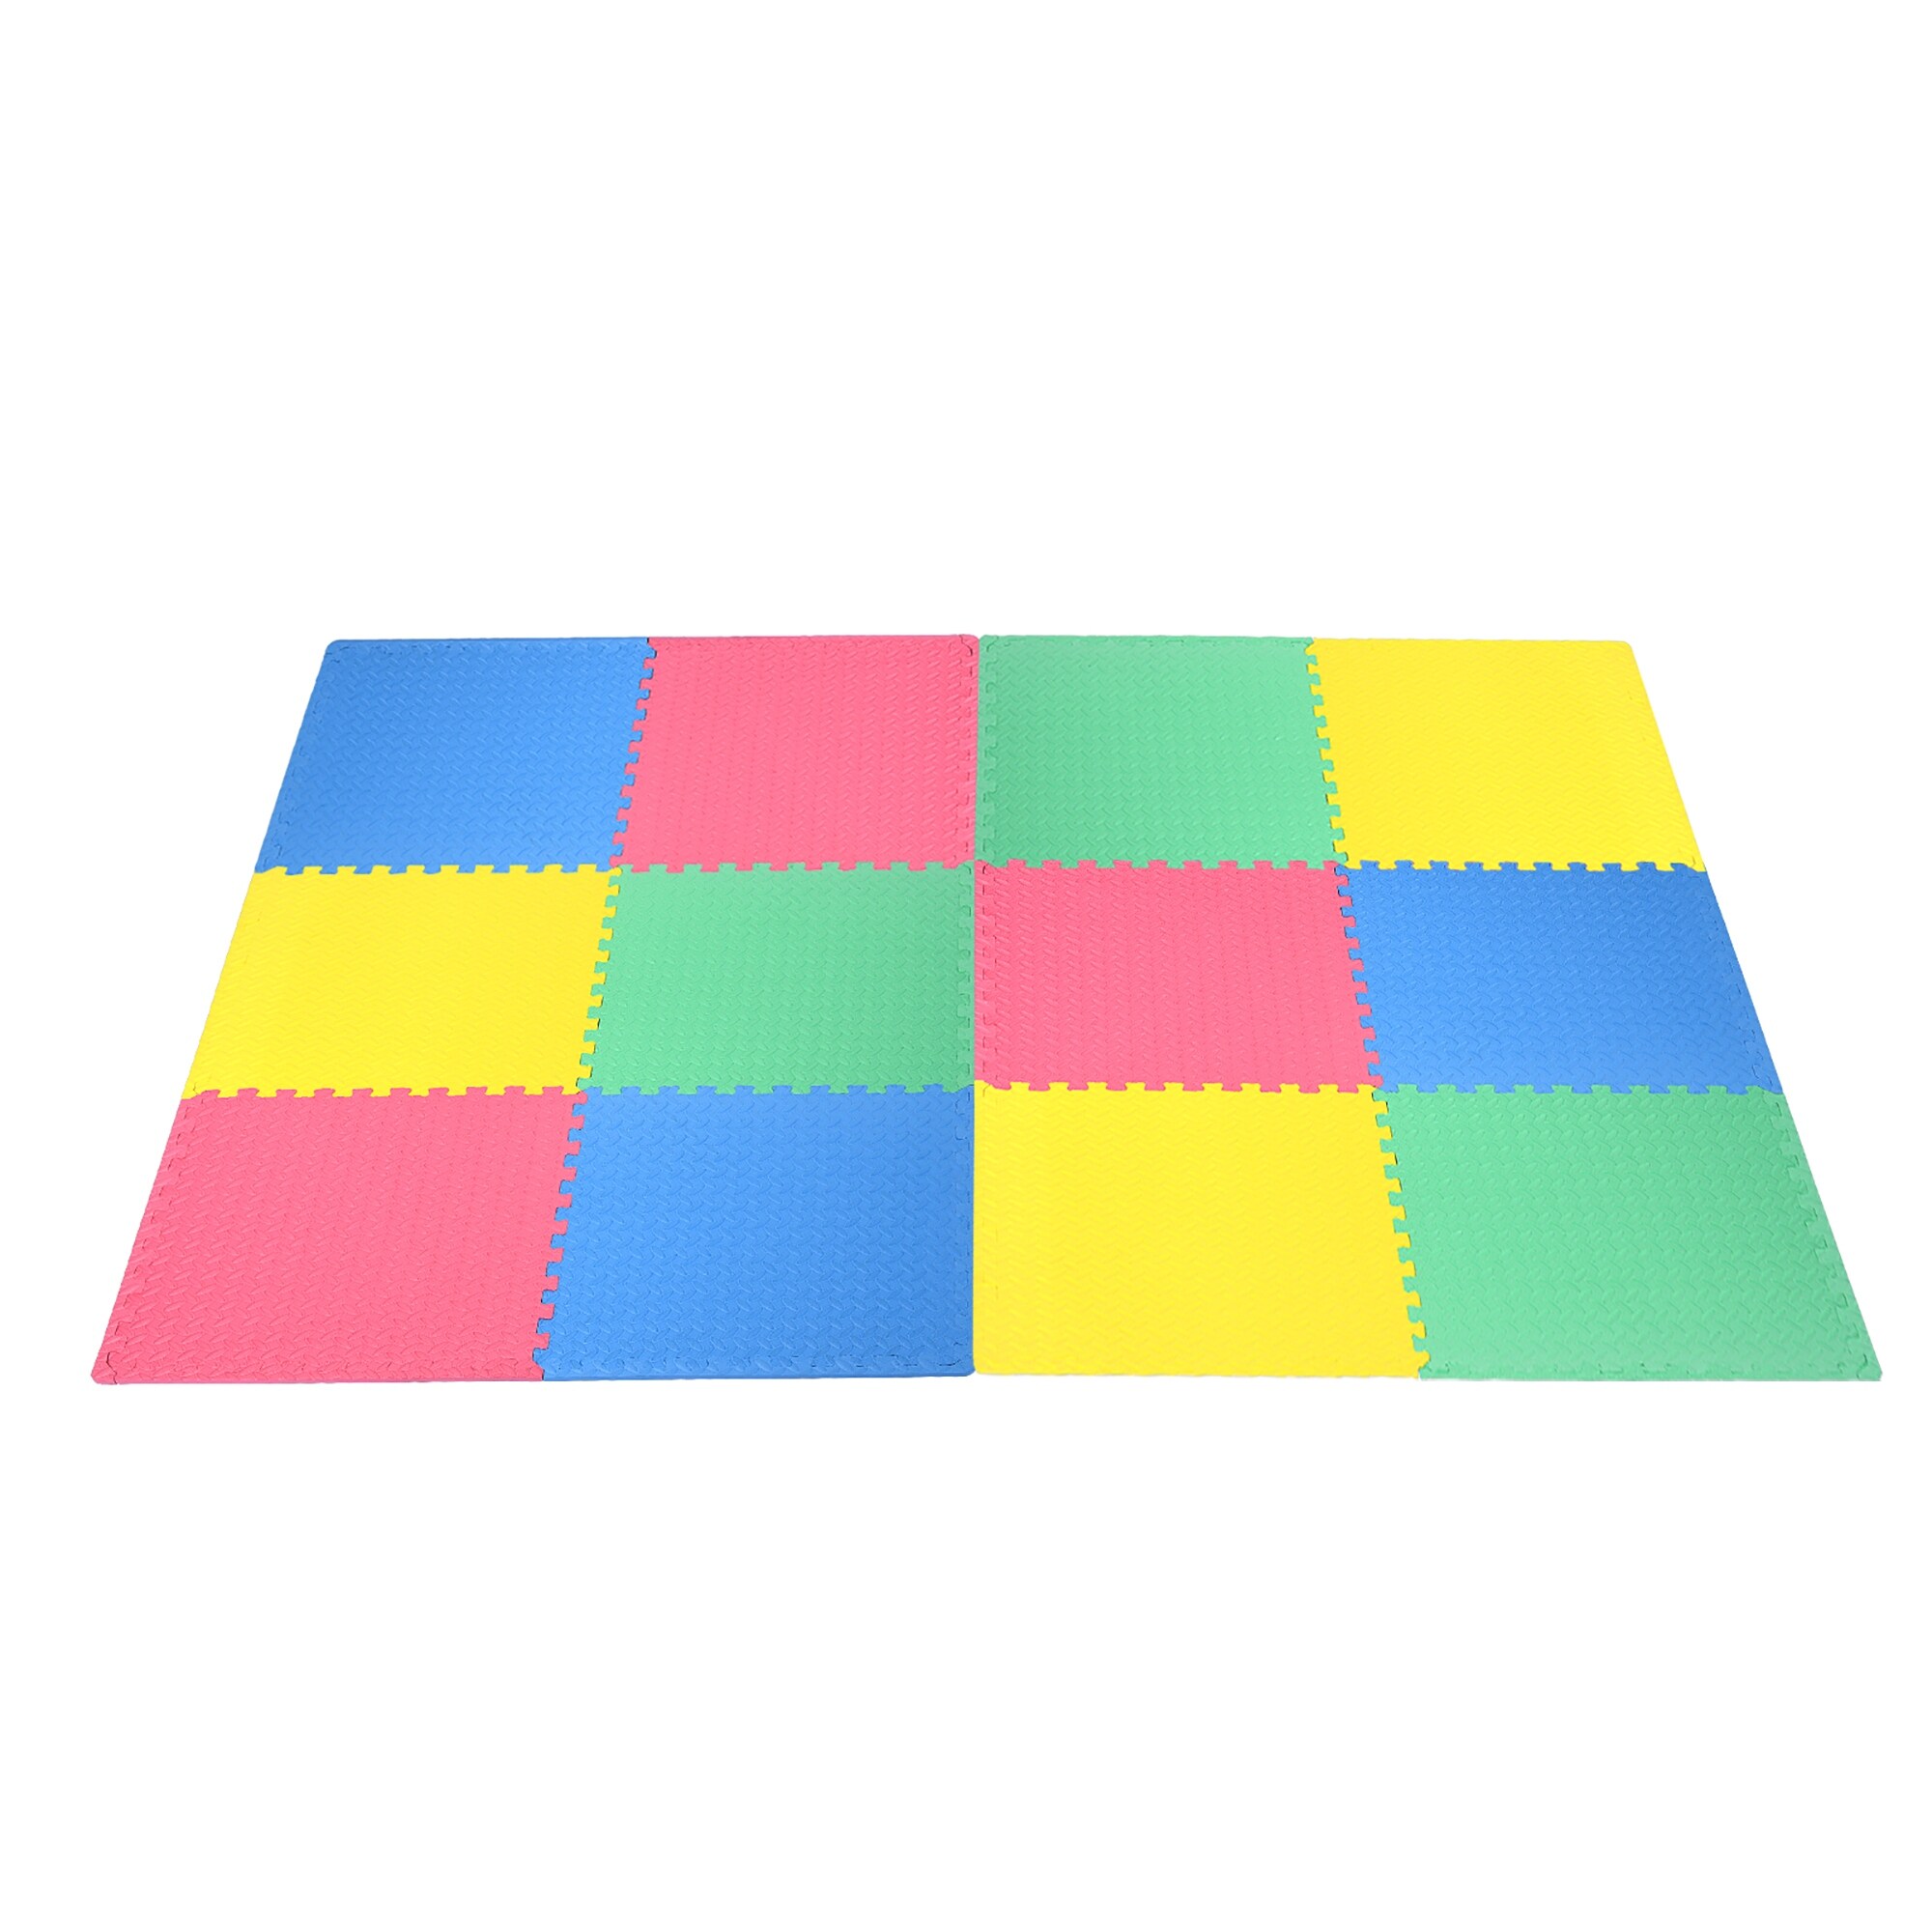 Safety Floor Play Mat for Kids Solid Foam Exercise Puzzle Mats 10 Square Ft. 